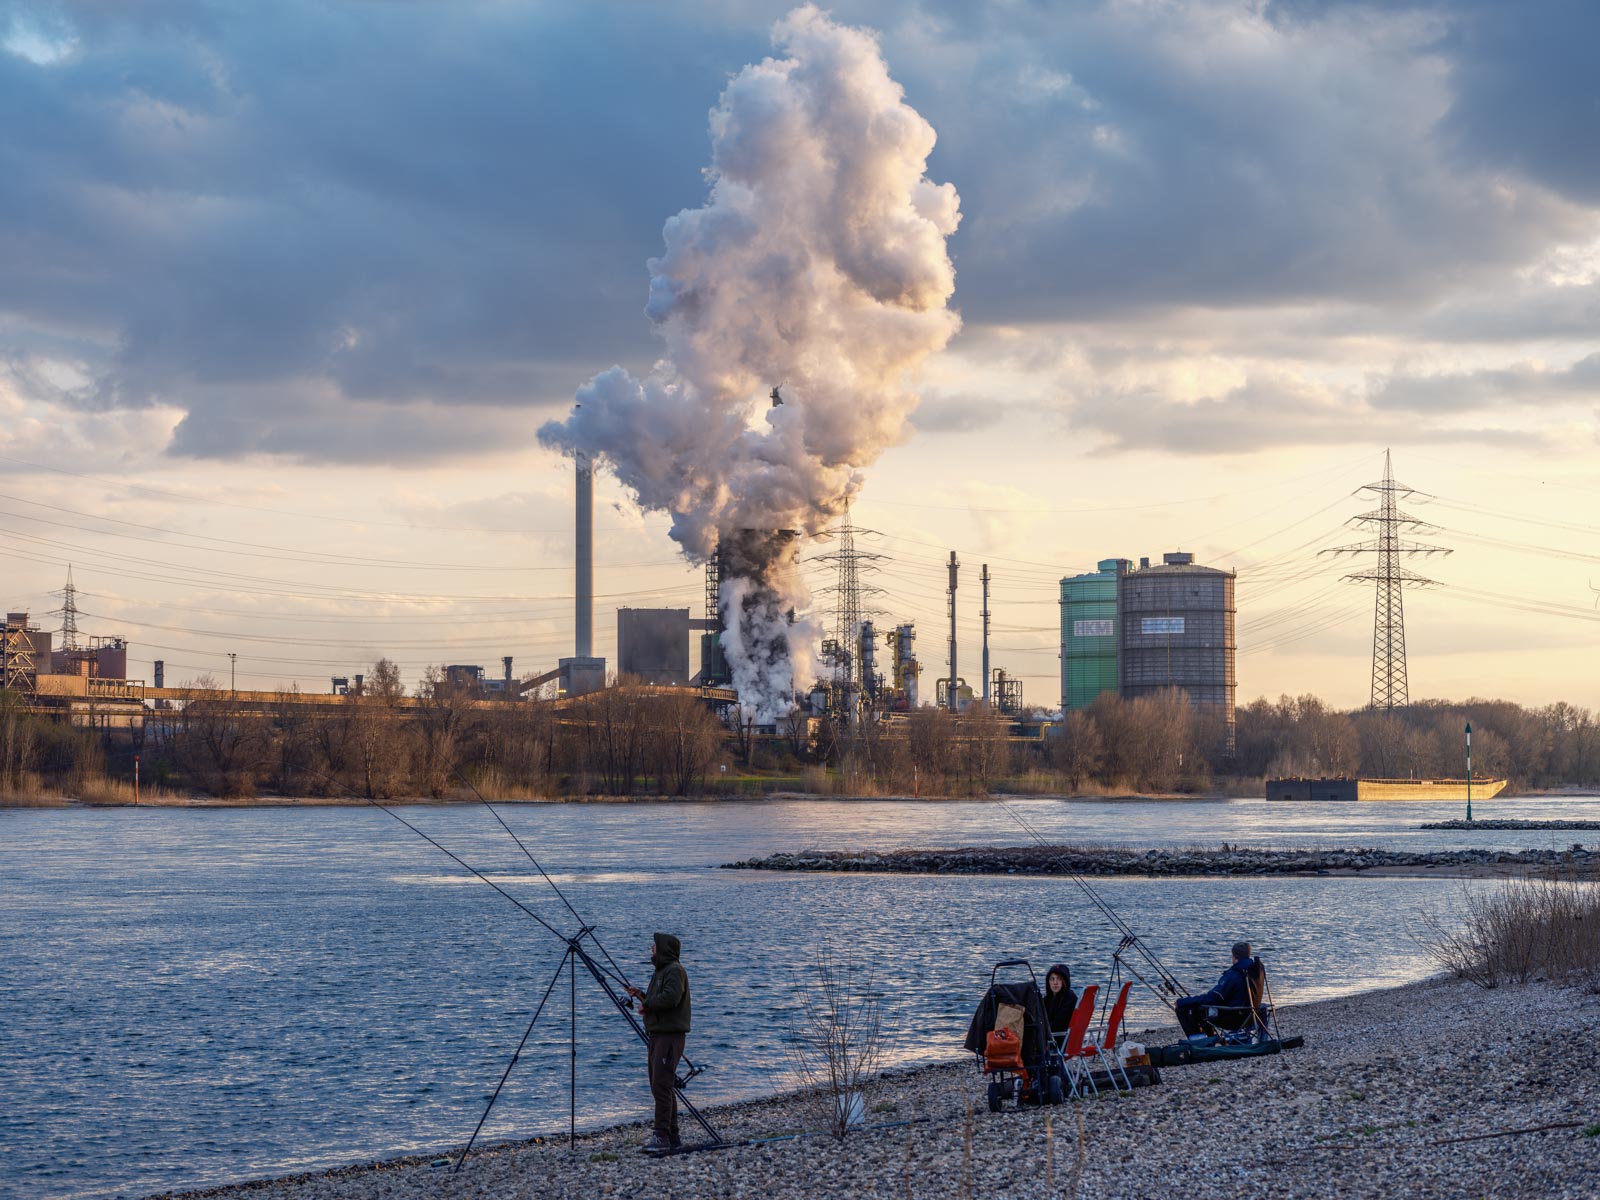 Anglers on the Rhine in Duisburg-Rheinhausen opposite the Krupp Mannesmann steelworks in March 2021 (Germany).